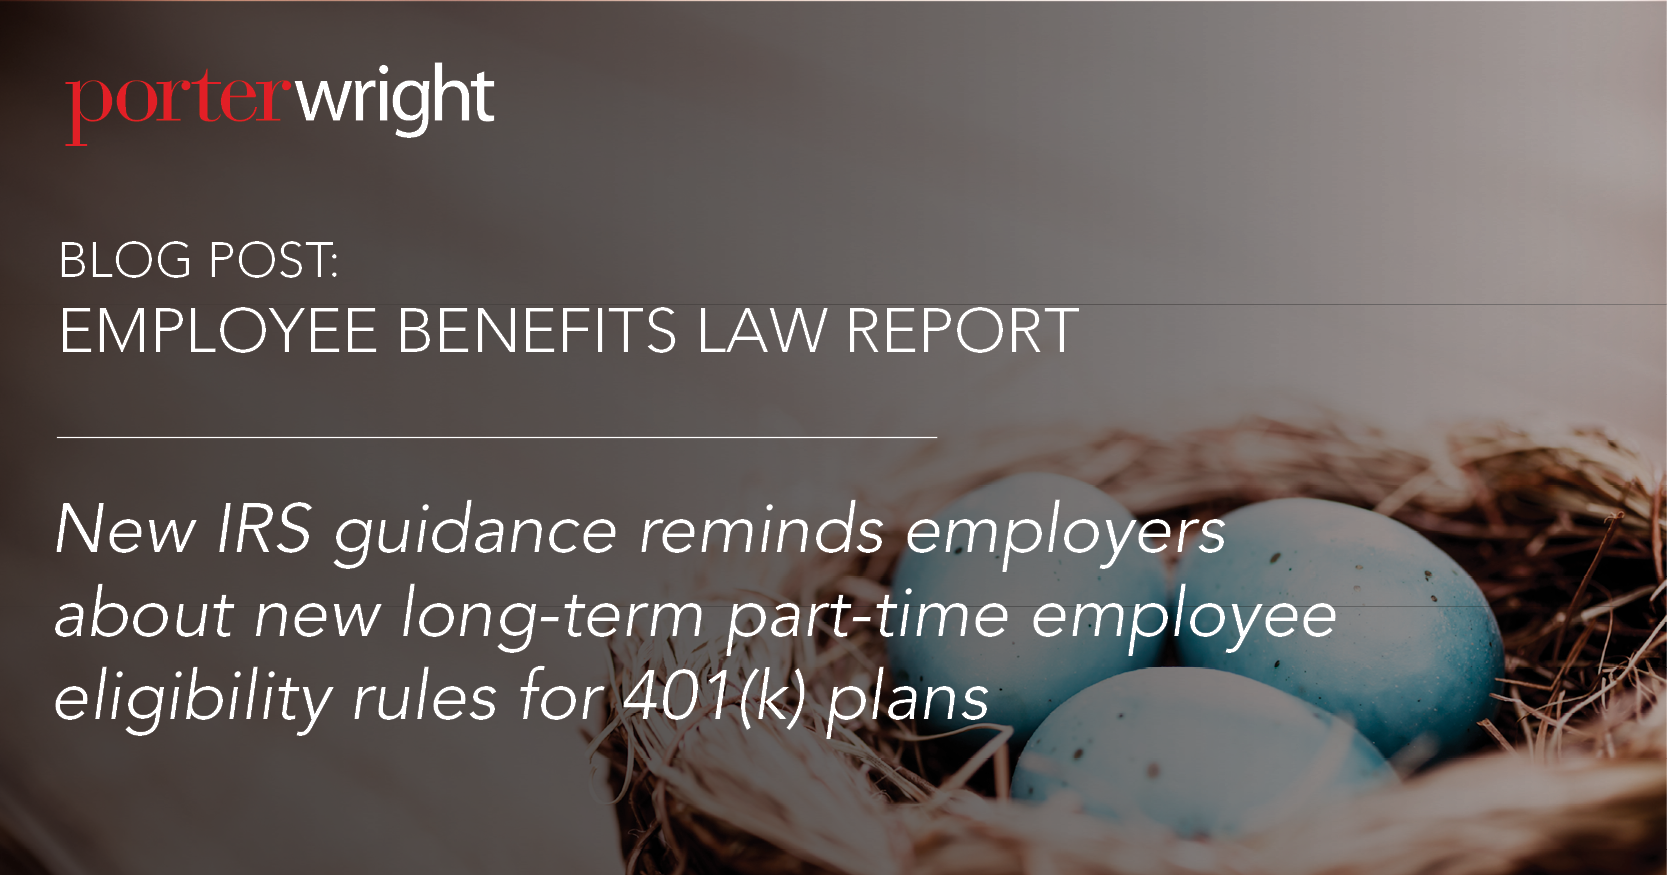 New IRS guidance reminds employers about new long